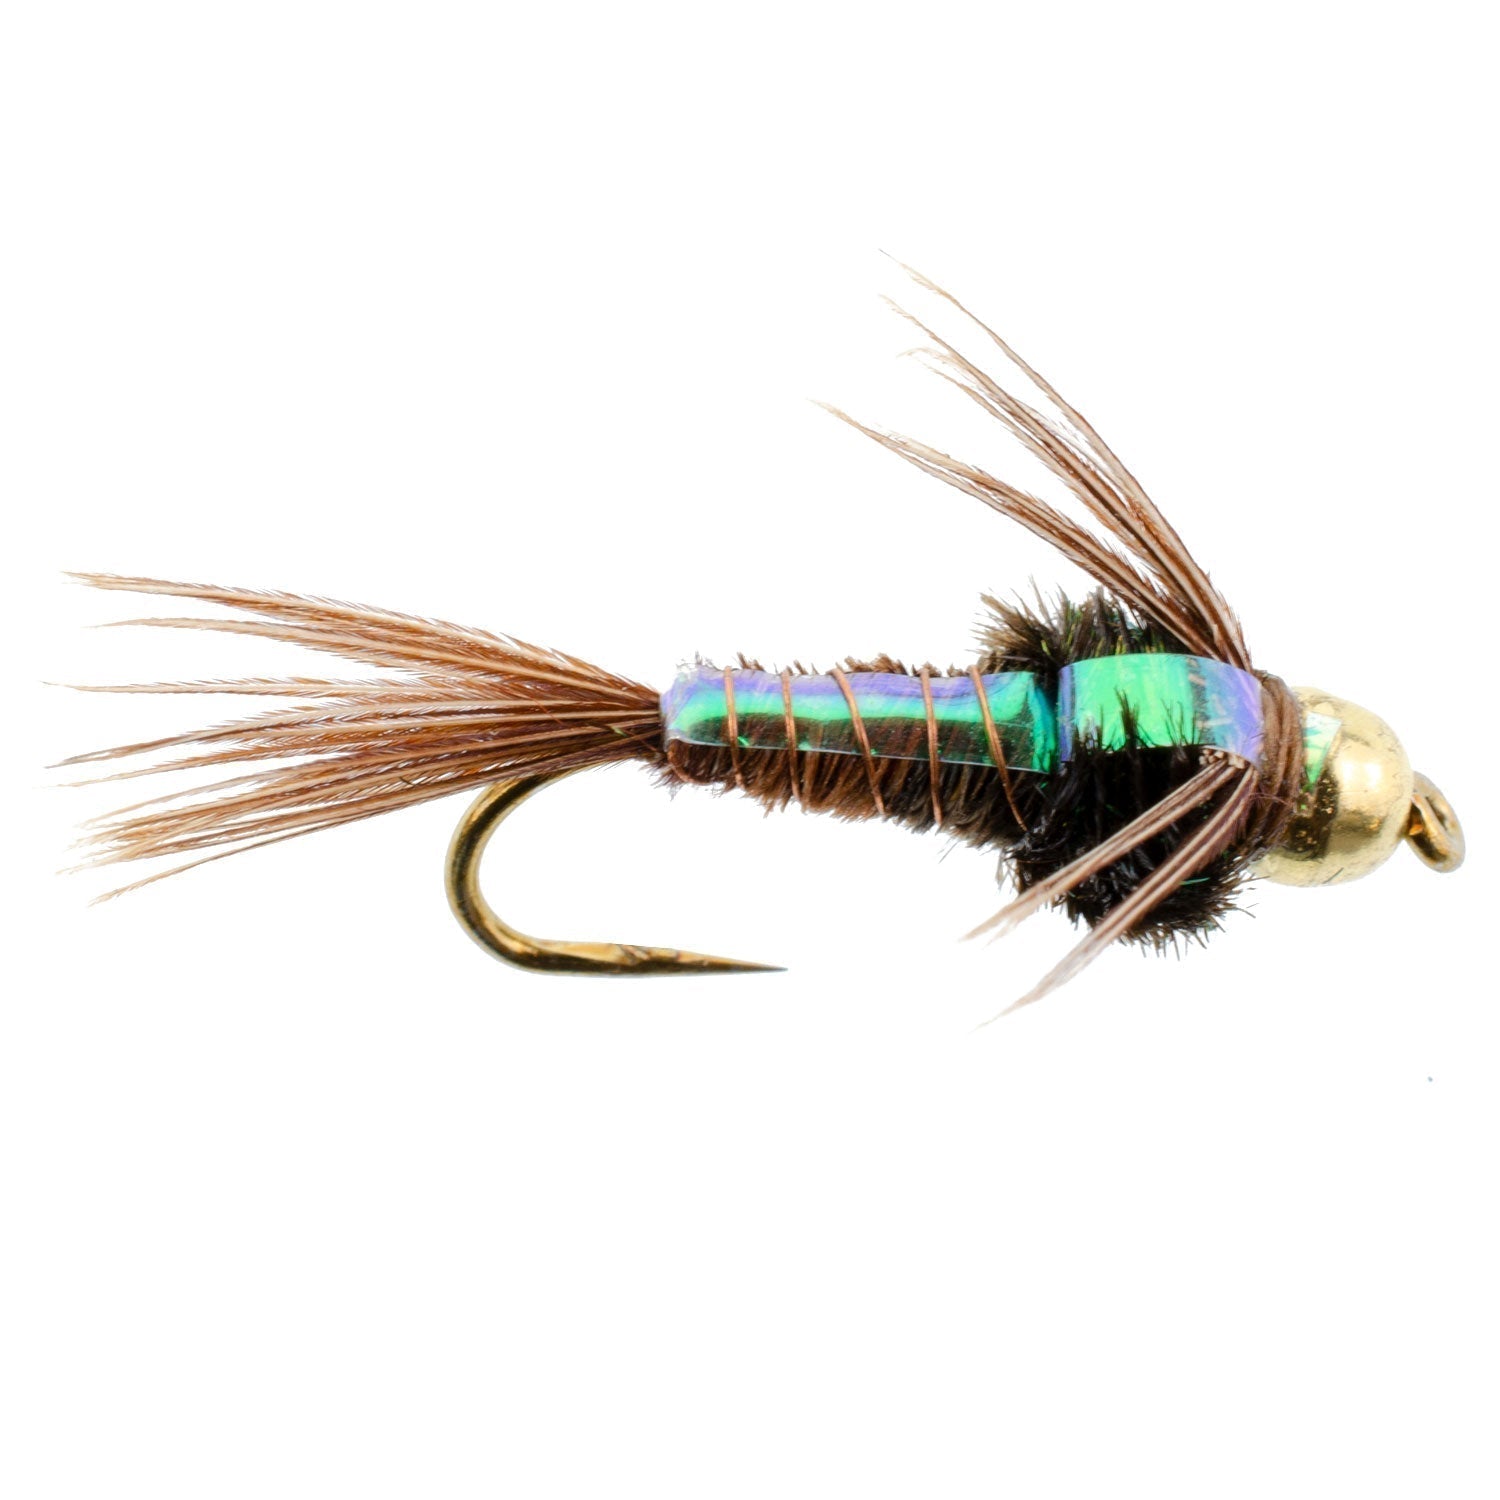 3 Pack Barbless Bead Head Flashback Pheasant Tail Nymph Flies Hook Size 16